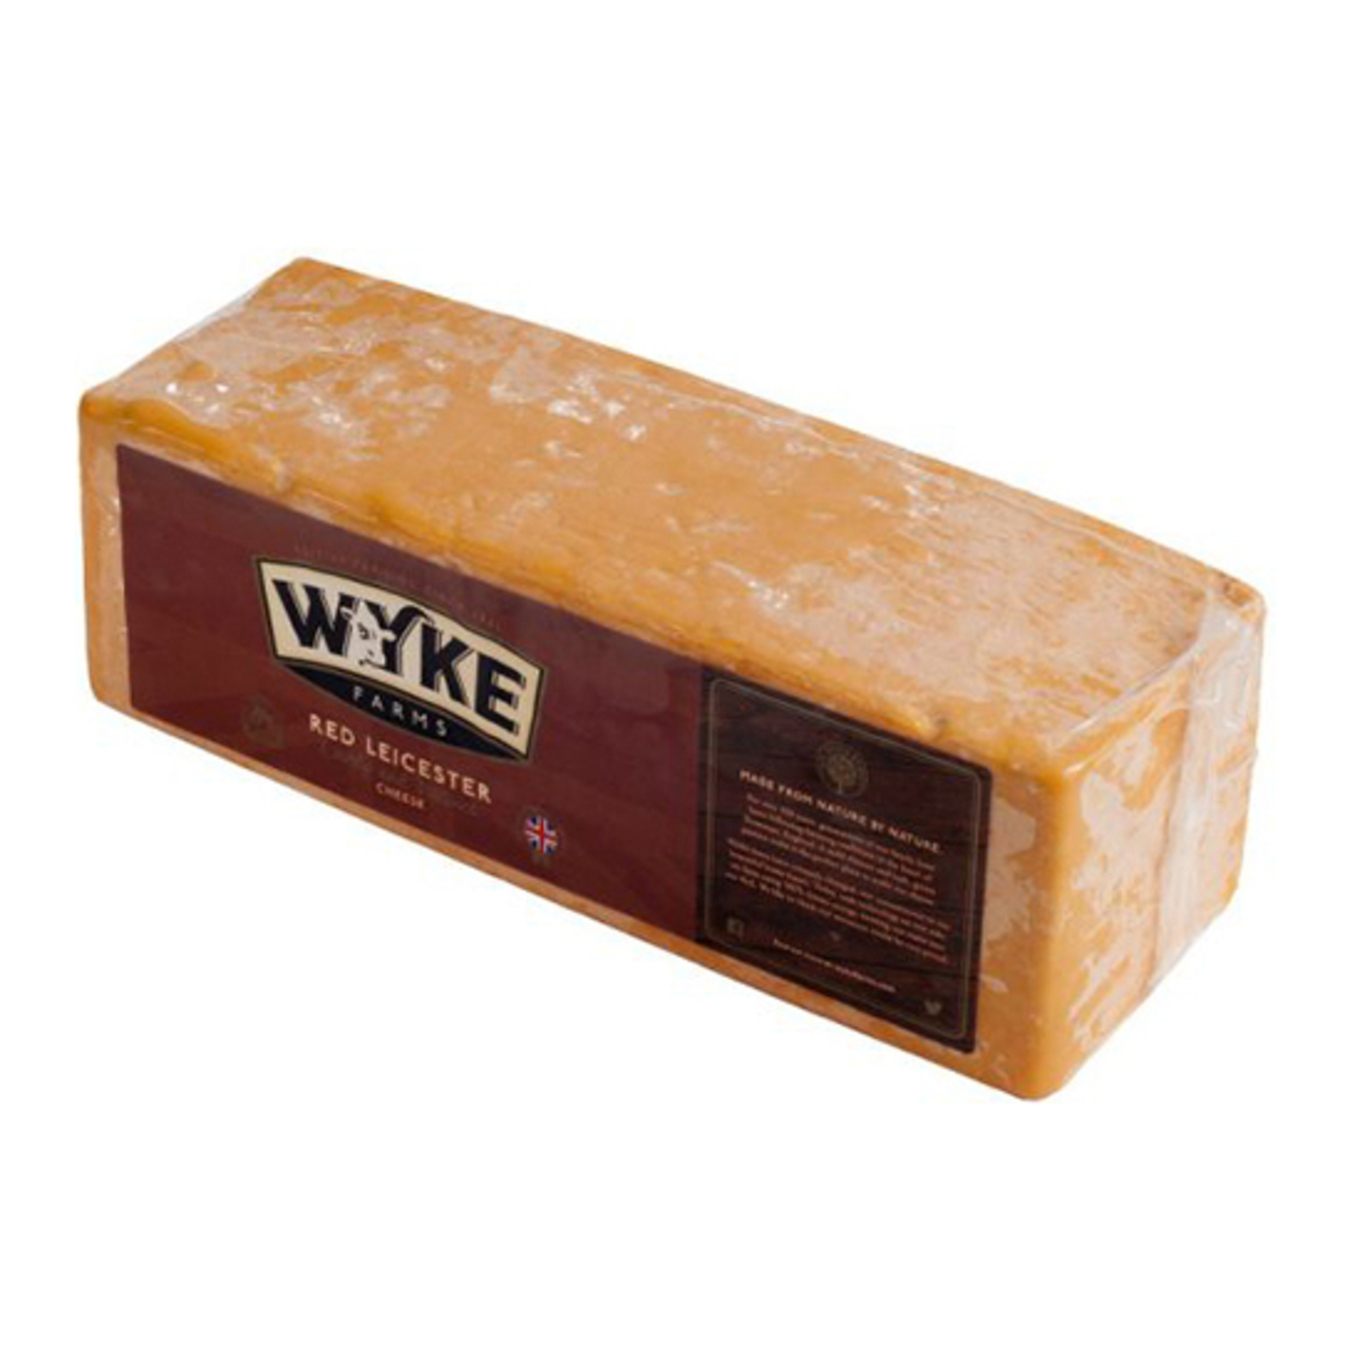 Wyke Farms Red Leicester Cheese 56%